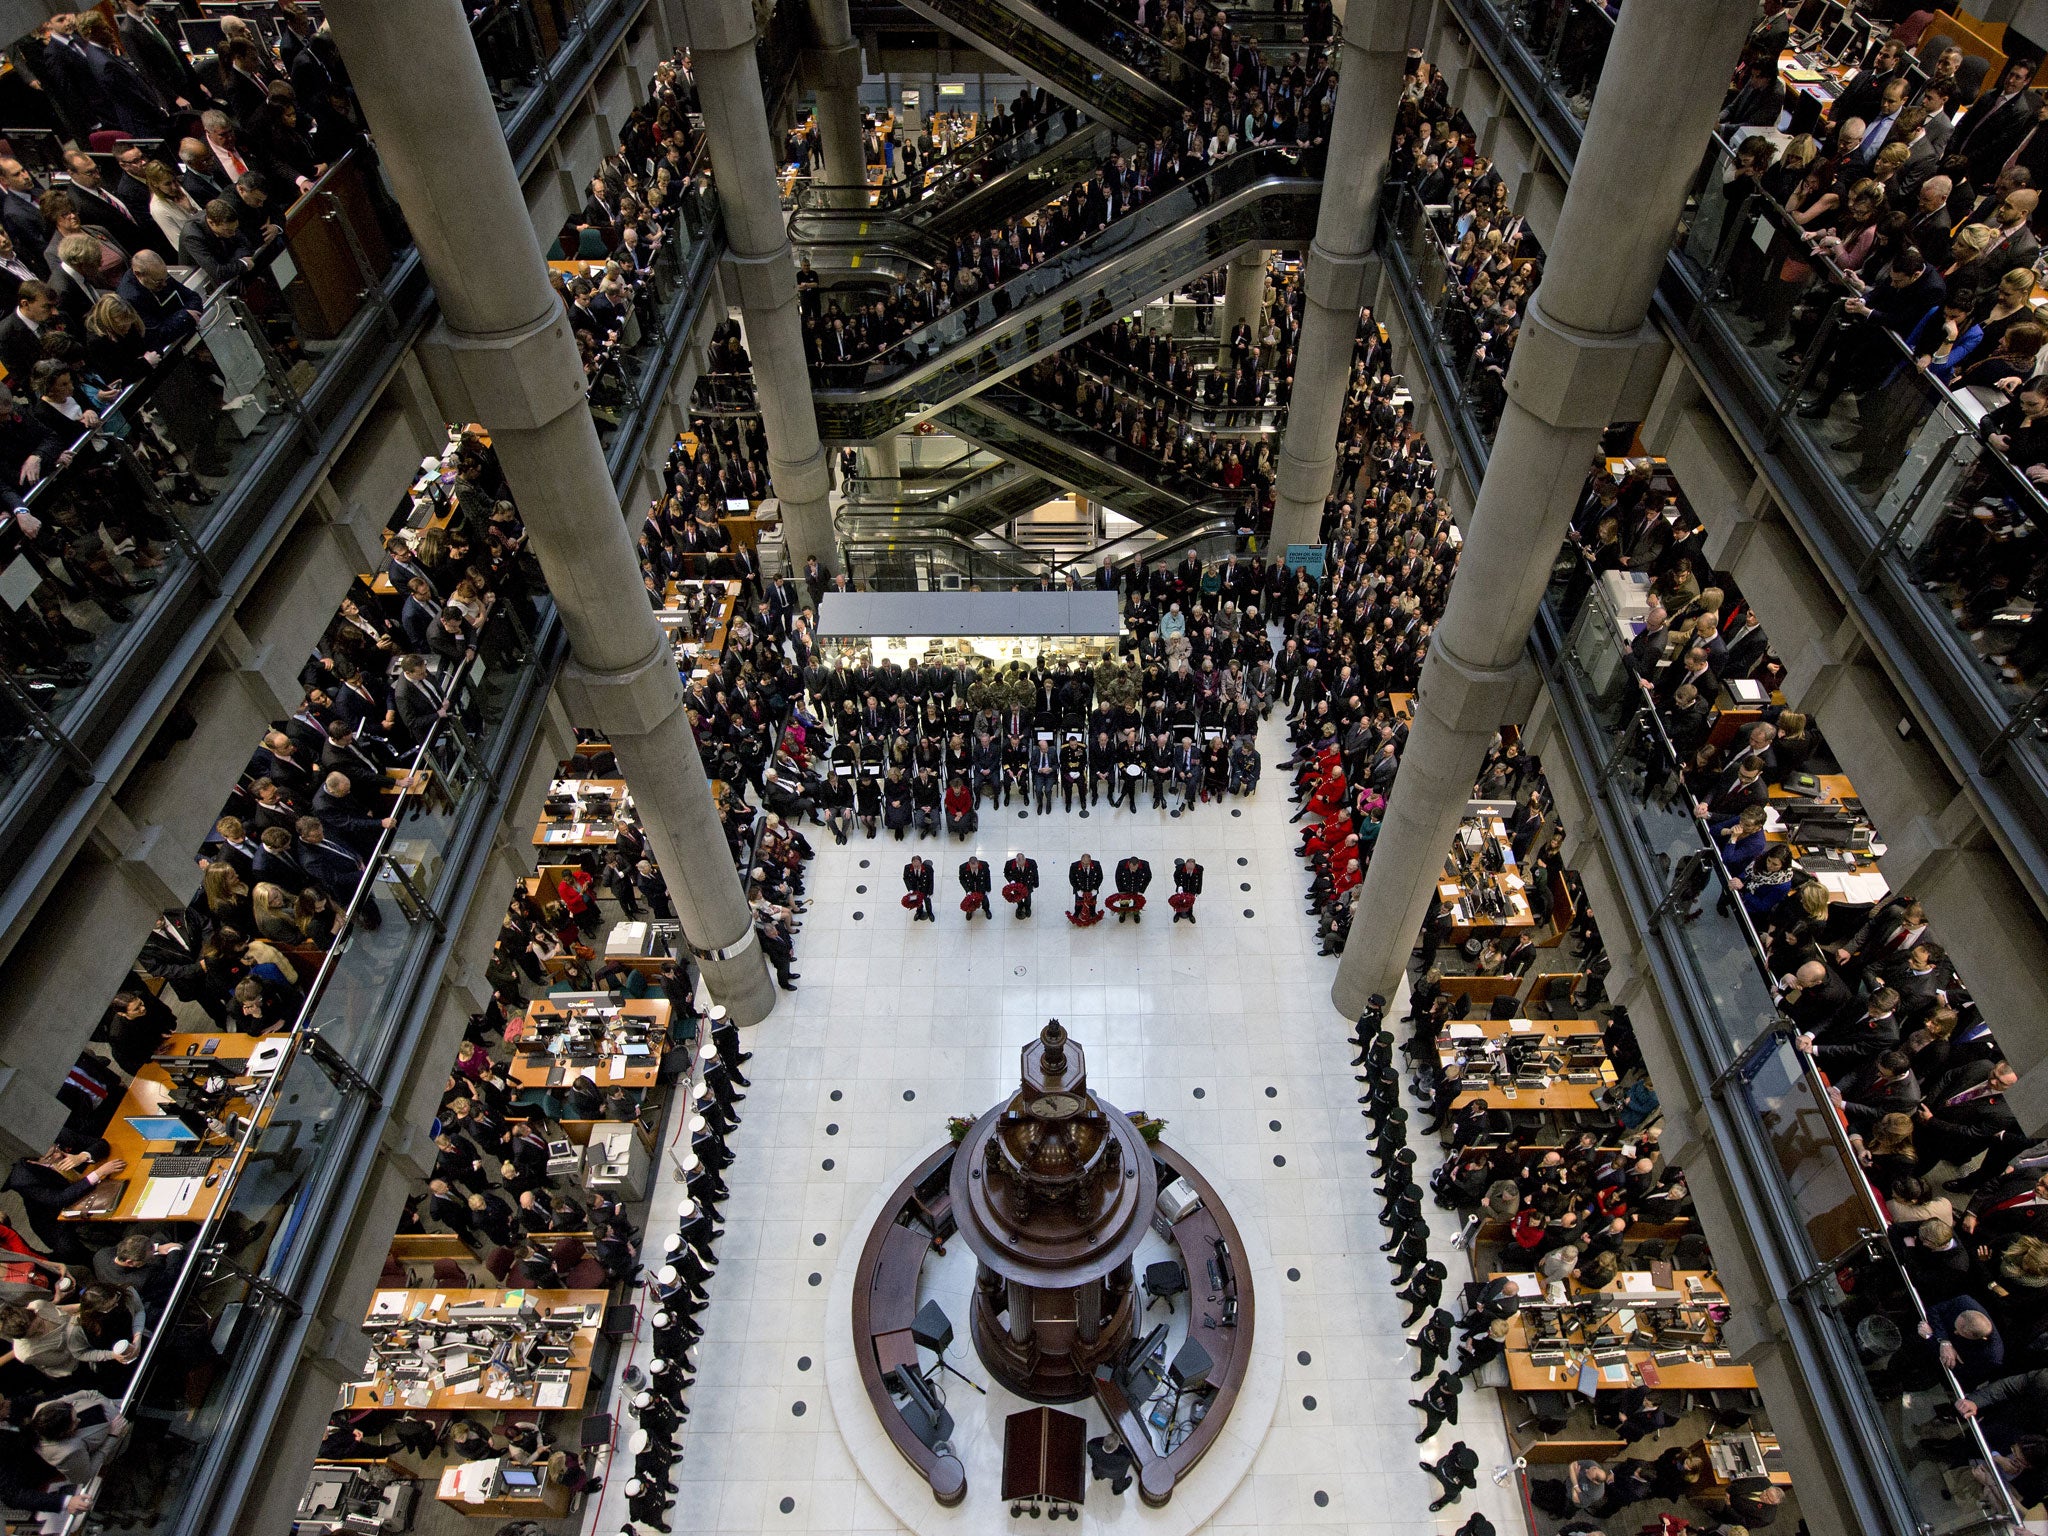 Lloyd's of London has called the building home since 1986